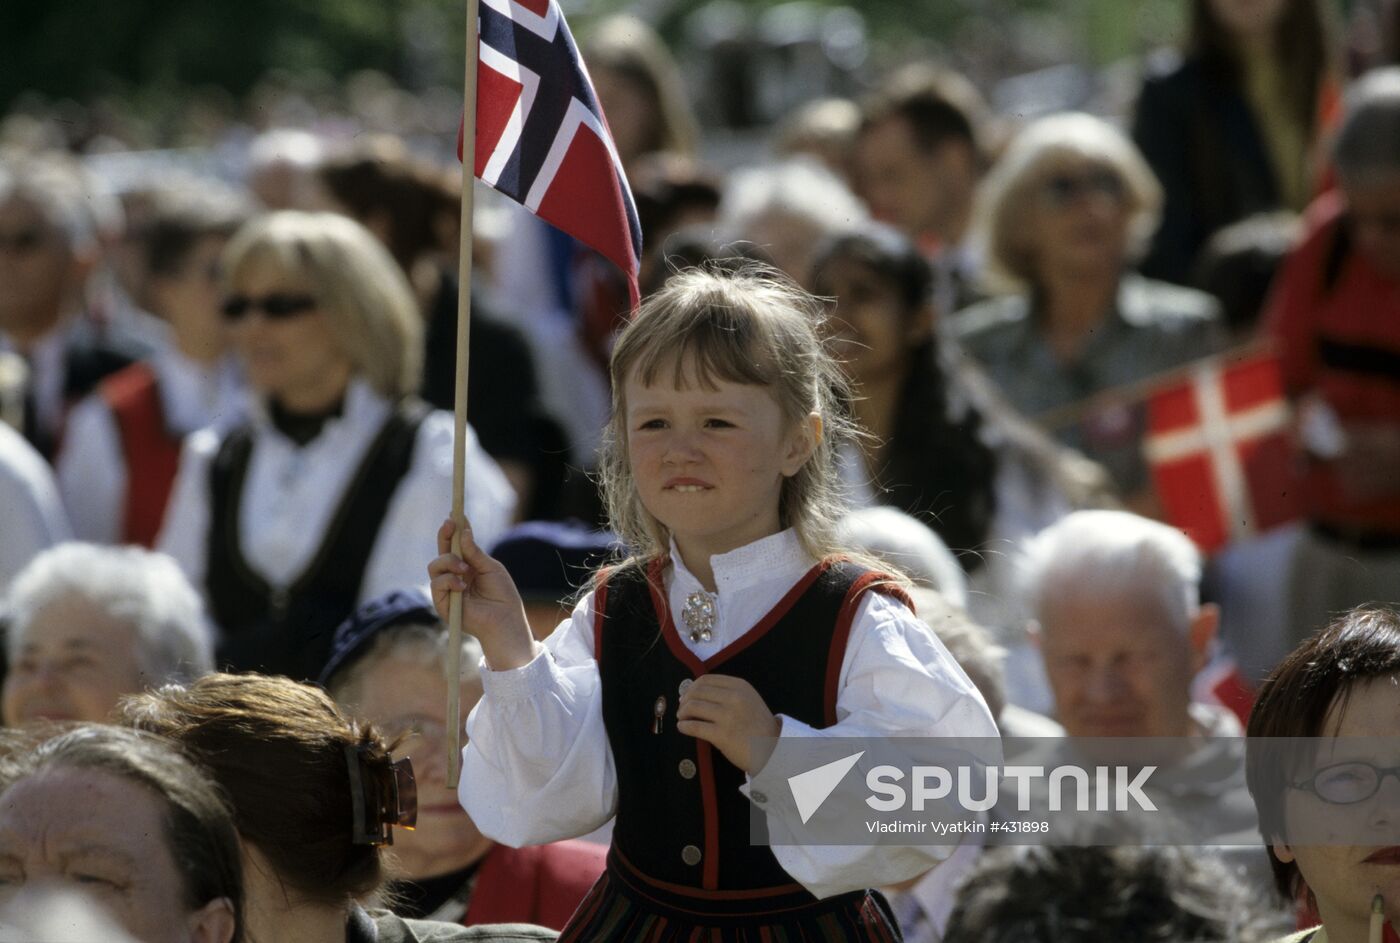 Norway's Independence Day